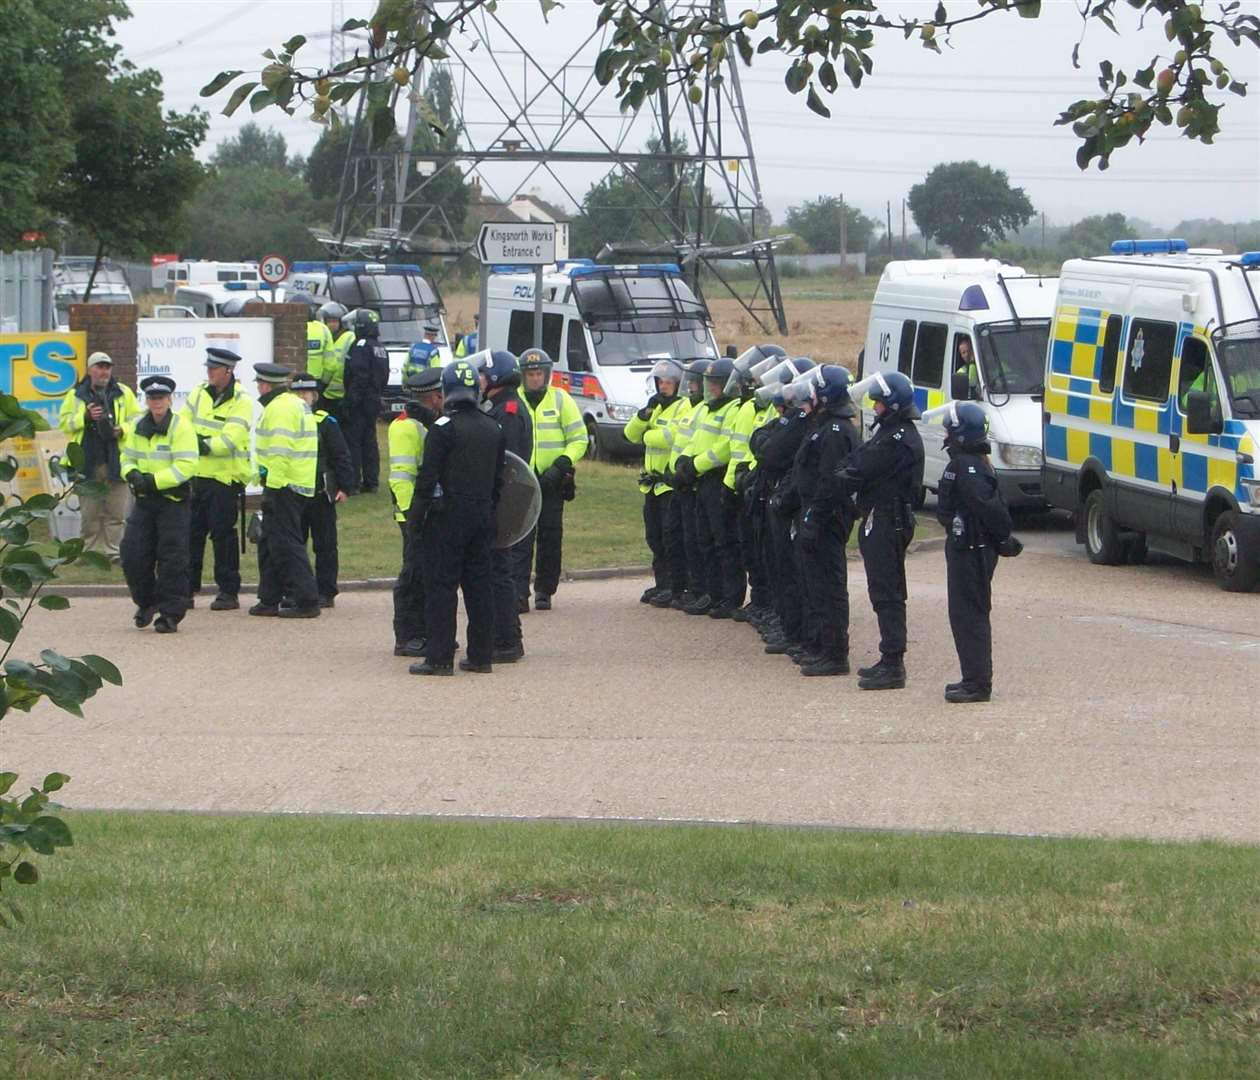 Riot police prepare to tackle a sit down protest by climate change campaigners at the gates of Kingsnorth power station